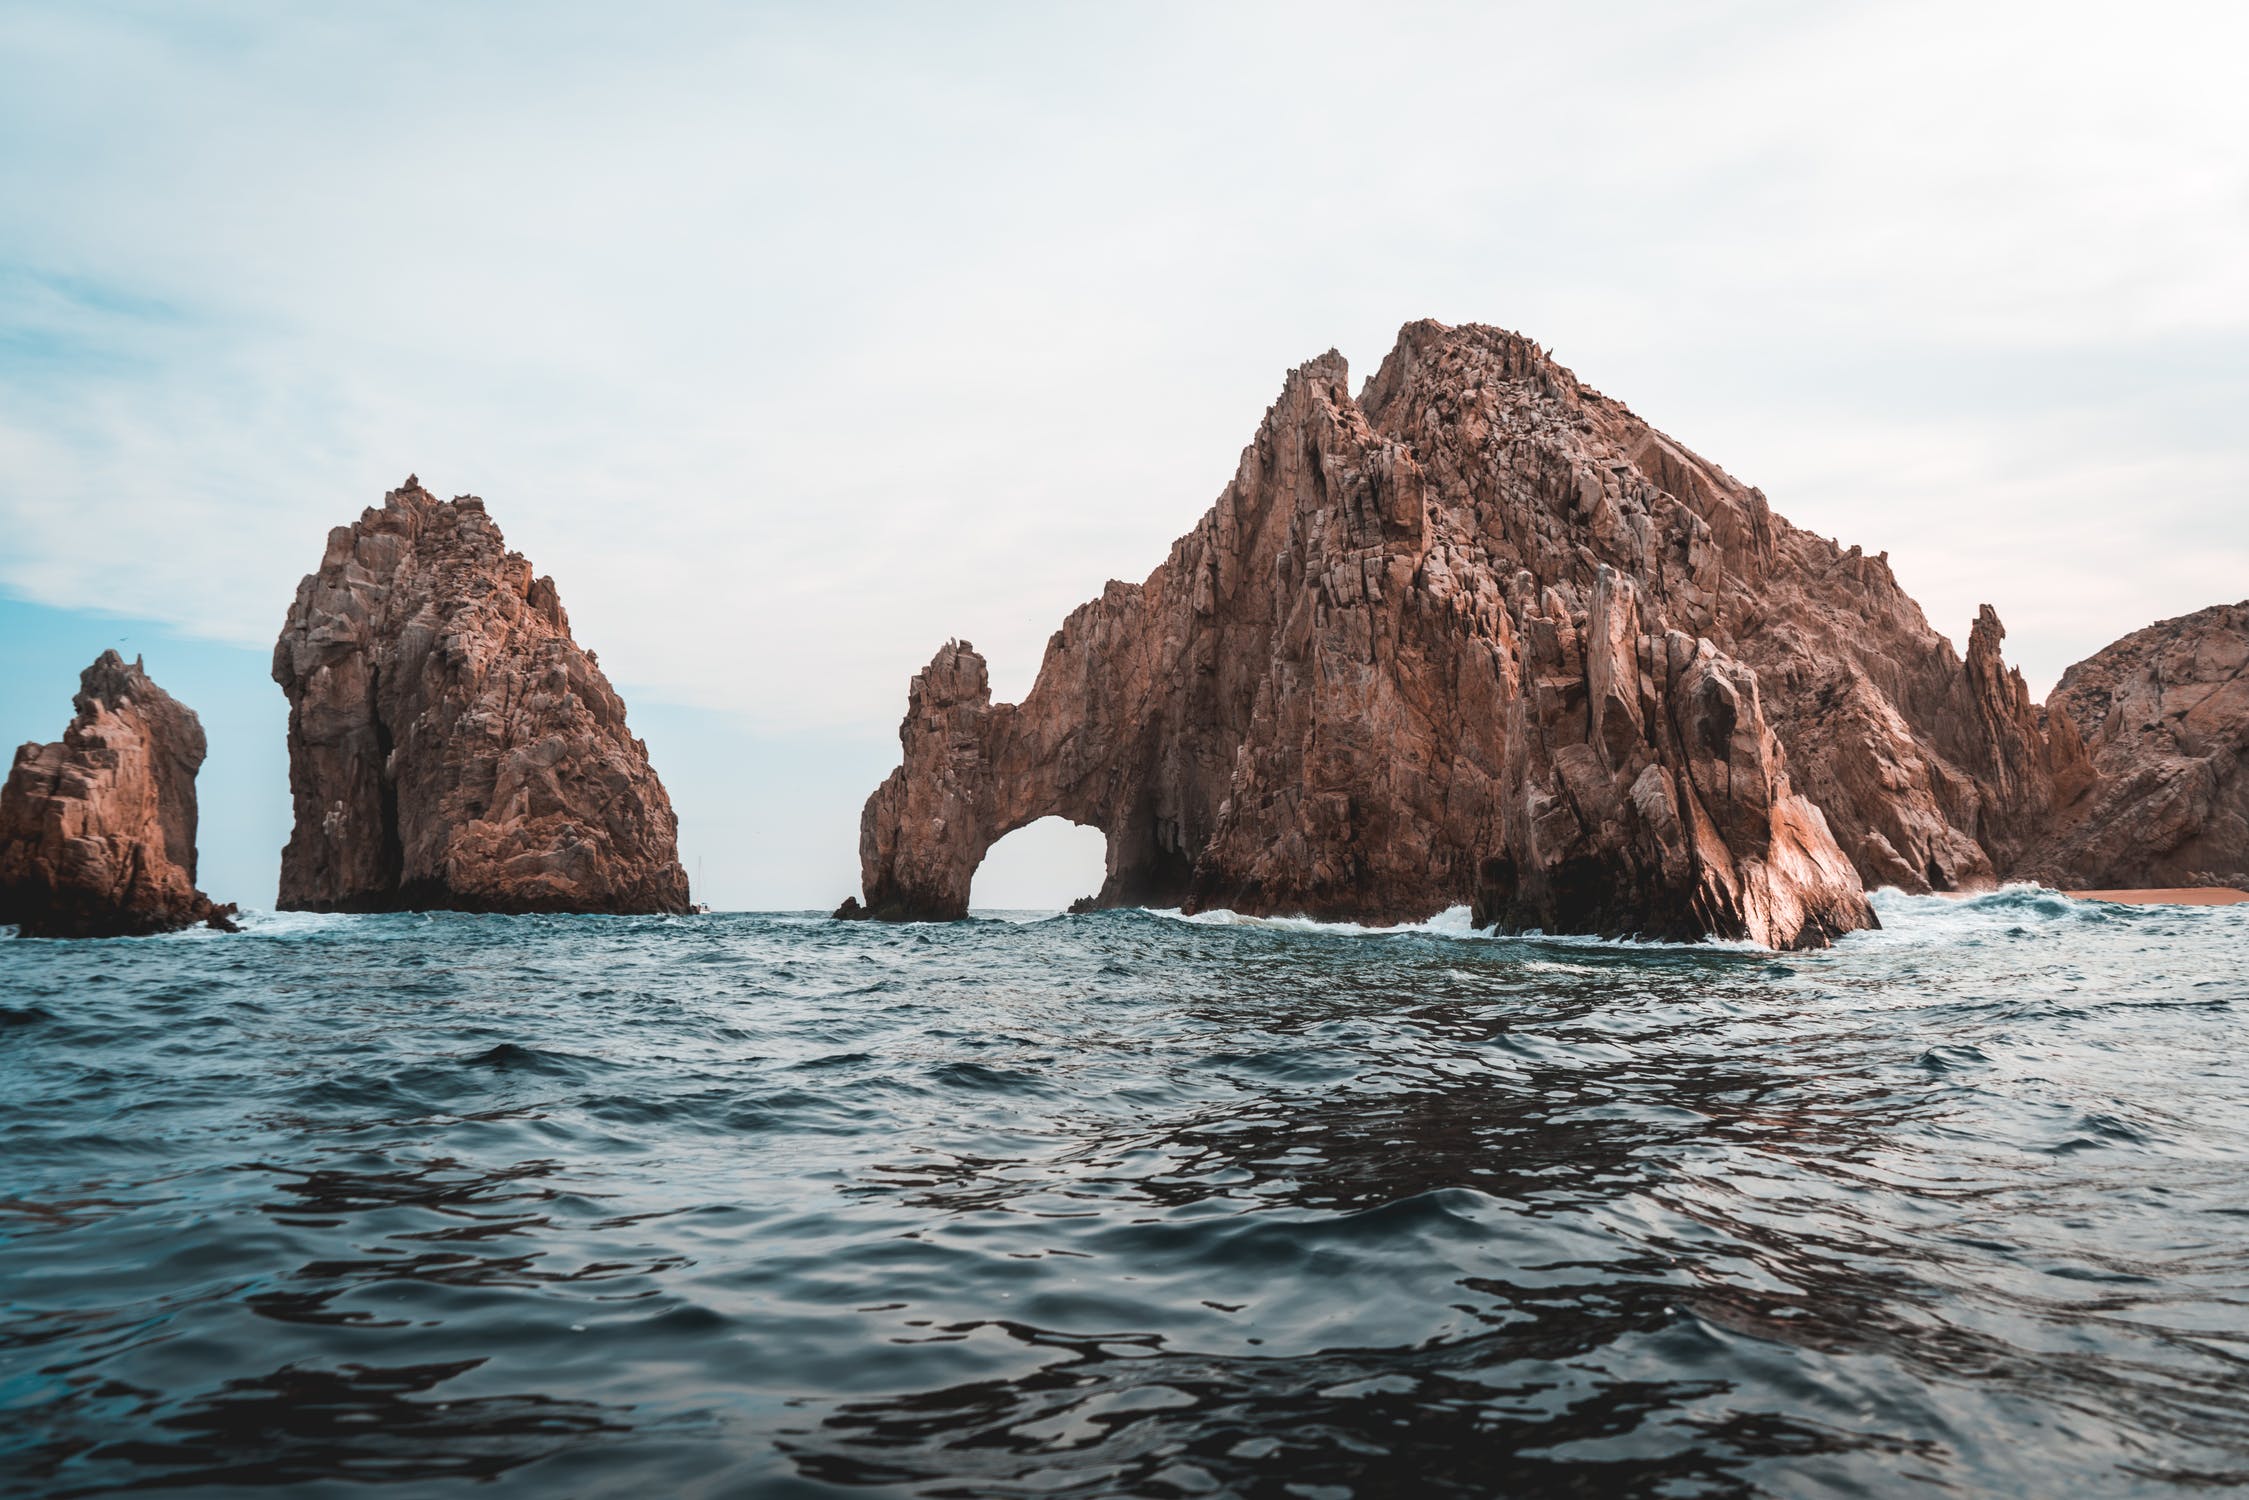 Princess – Where Would You Rather Be? Cabo San Lucas Edition